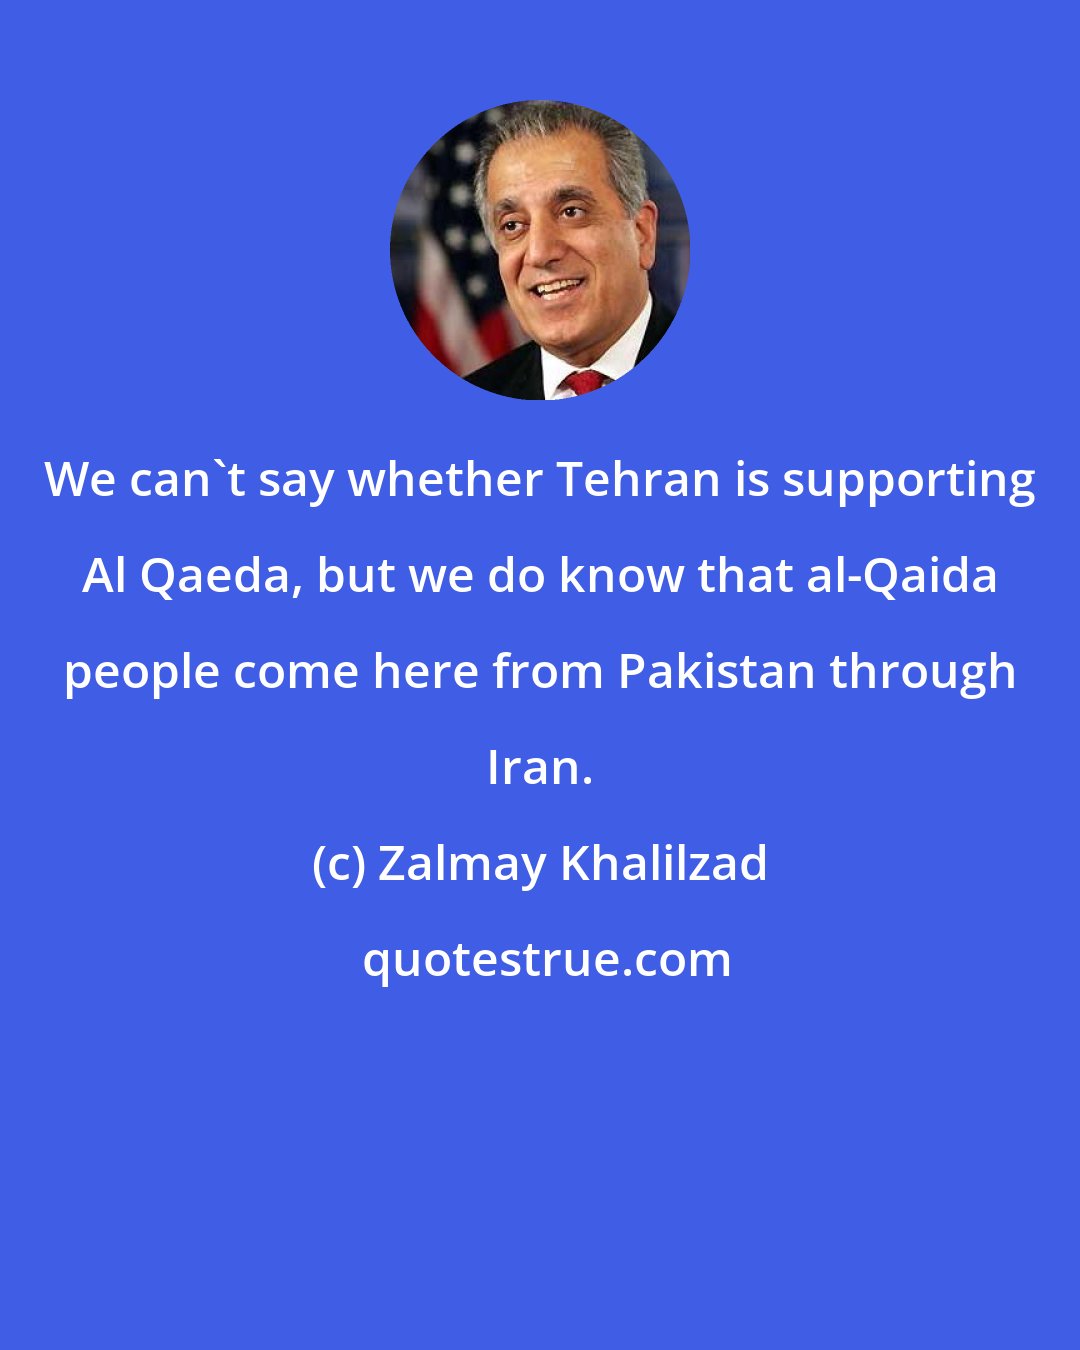 Zalmay Khalilzad: We can't say whether Tehran is supporting Al Qaeda, but we do know that al-Qaida people come here from Pakistan through Iran.